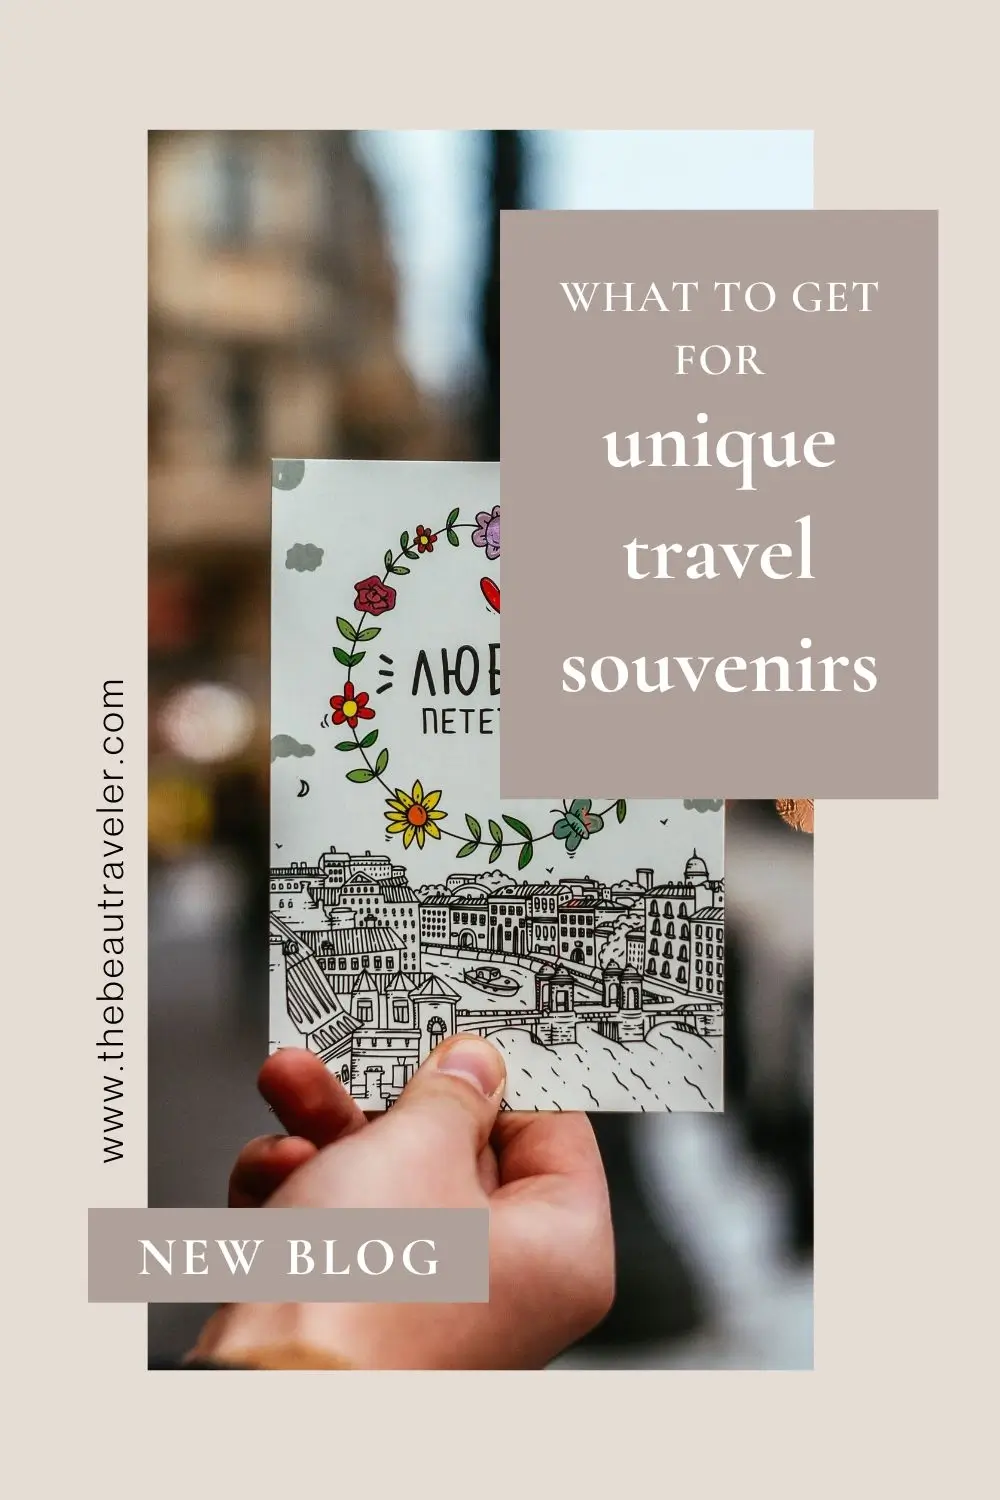 5 Unique Travel Souvenirs You Should Consider Getting At Least Once - The BeauTraveler